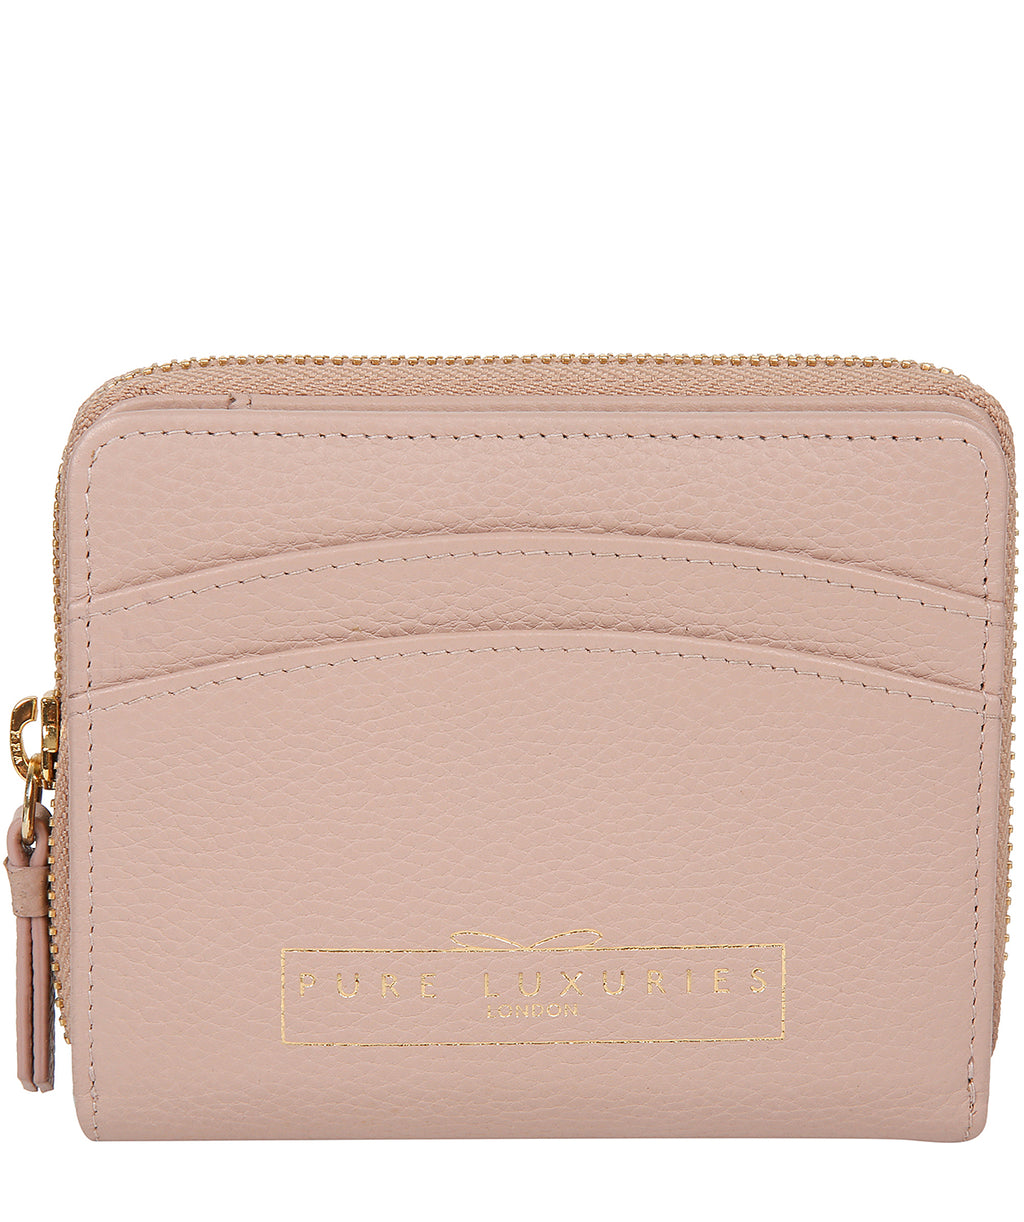 'Emely' Blush Pink Leather Purse – Pure Luxuries London